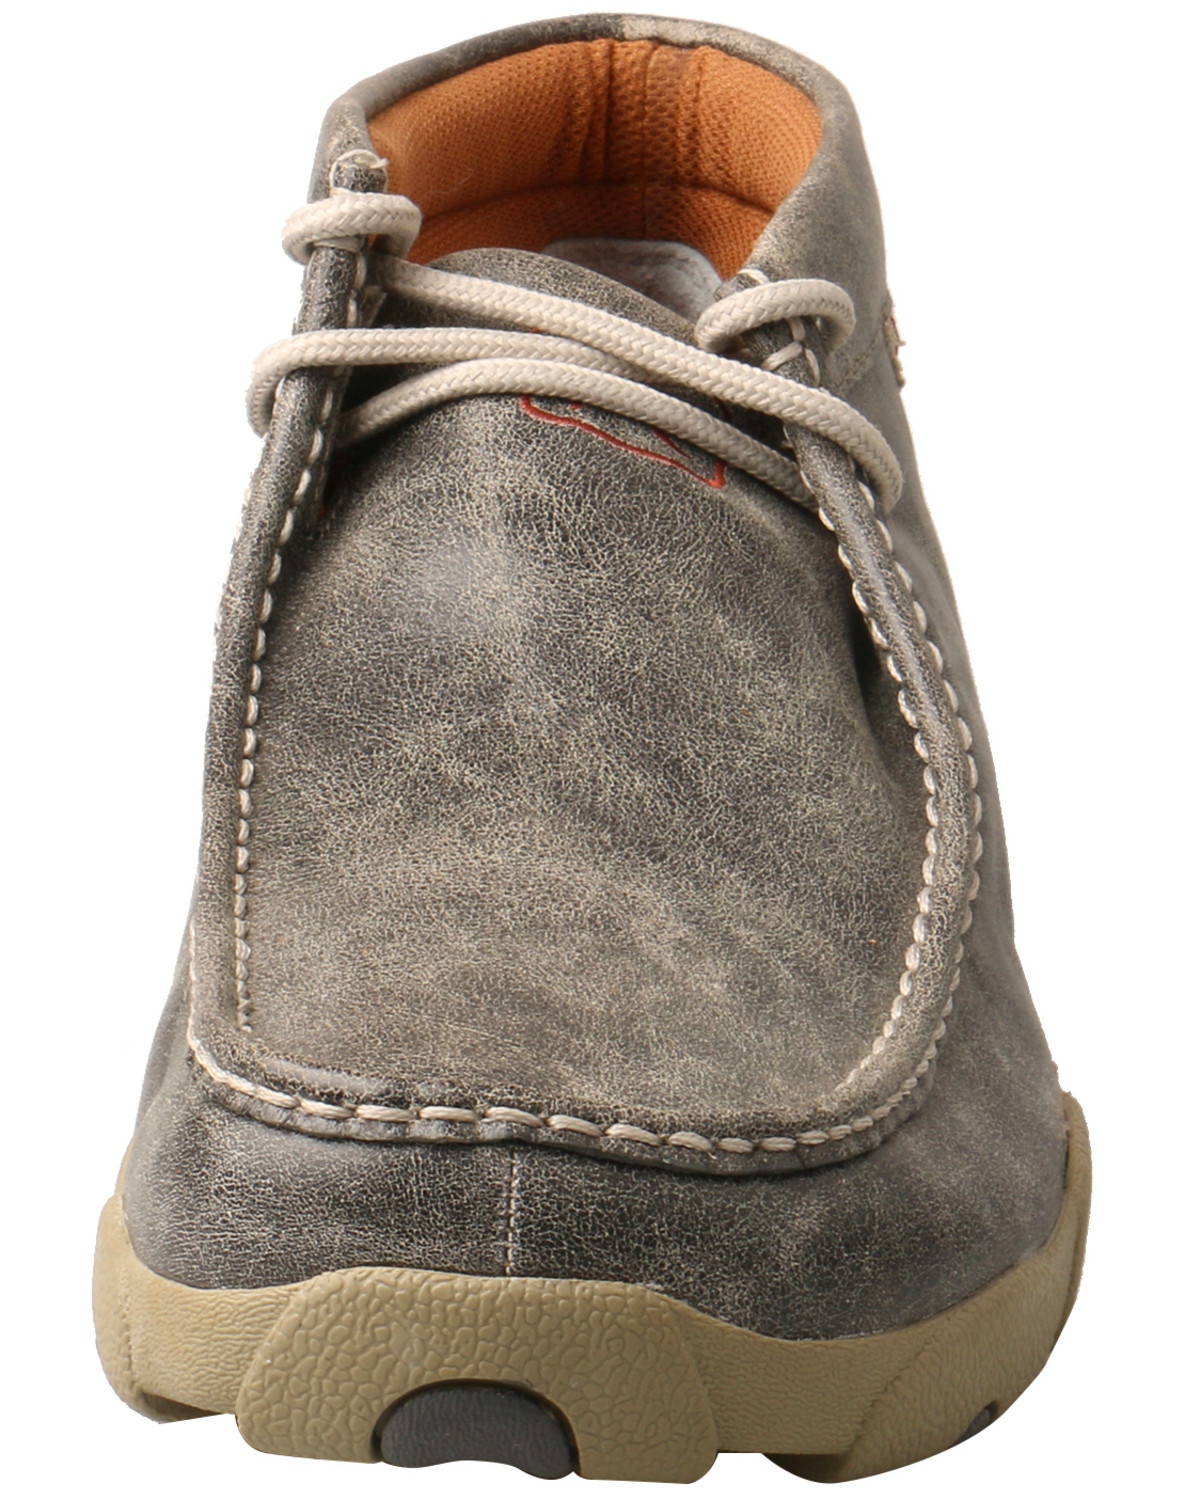 Twisted X Men's Driving Shoes Moc Toe Country Outfitter